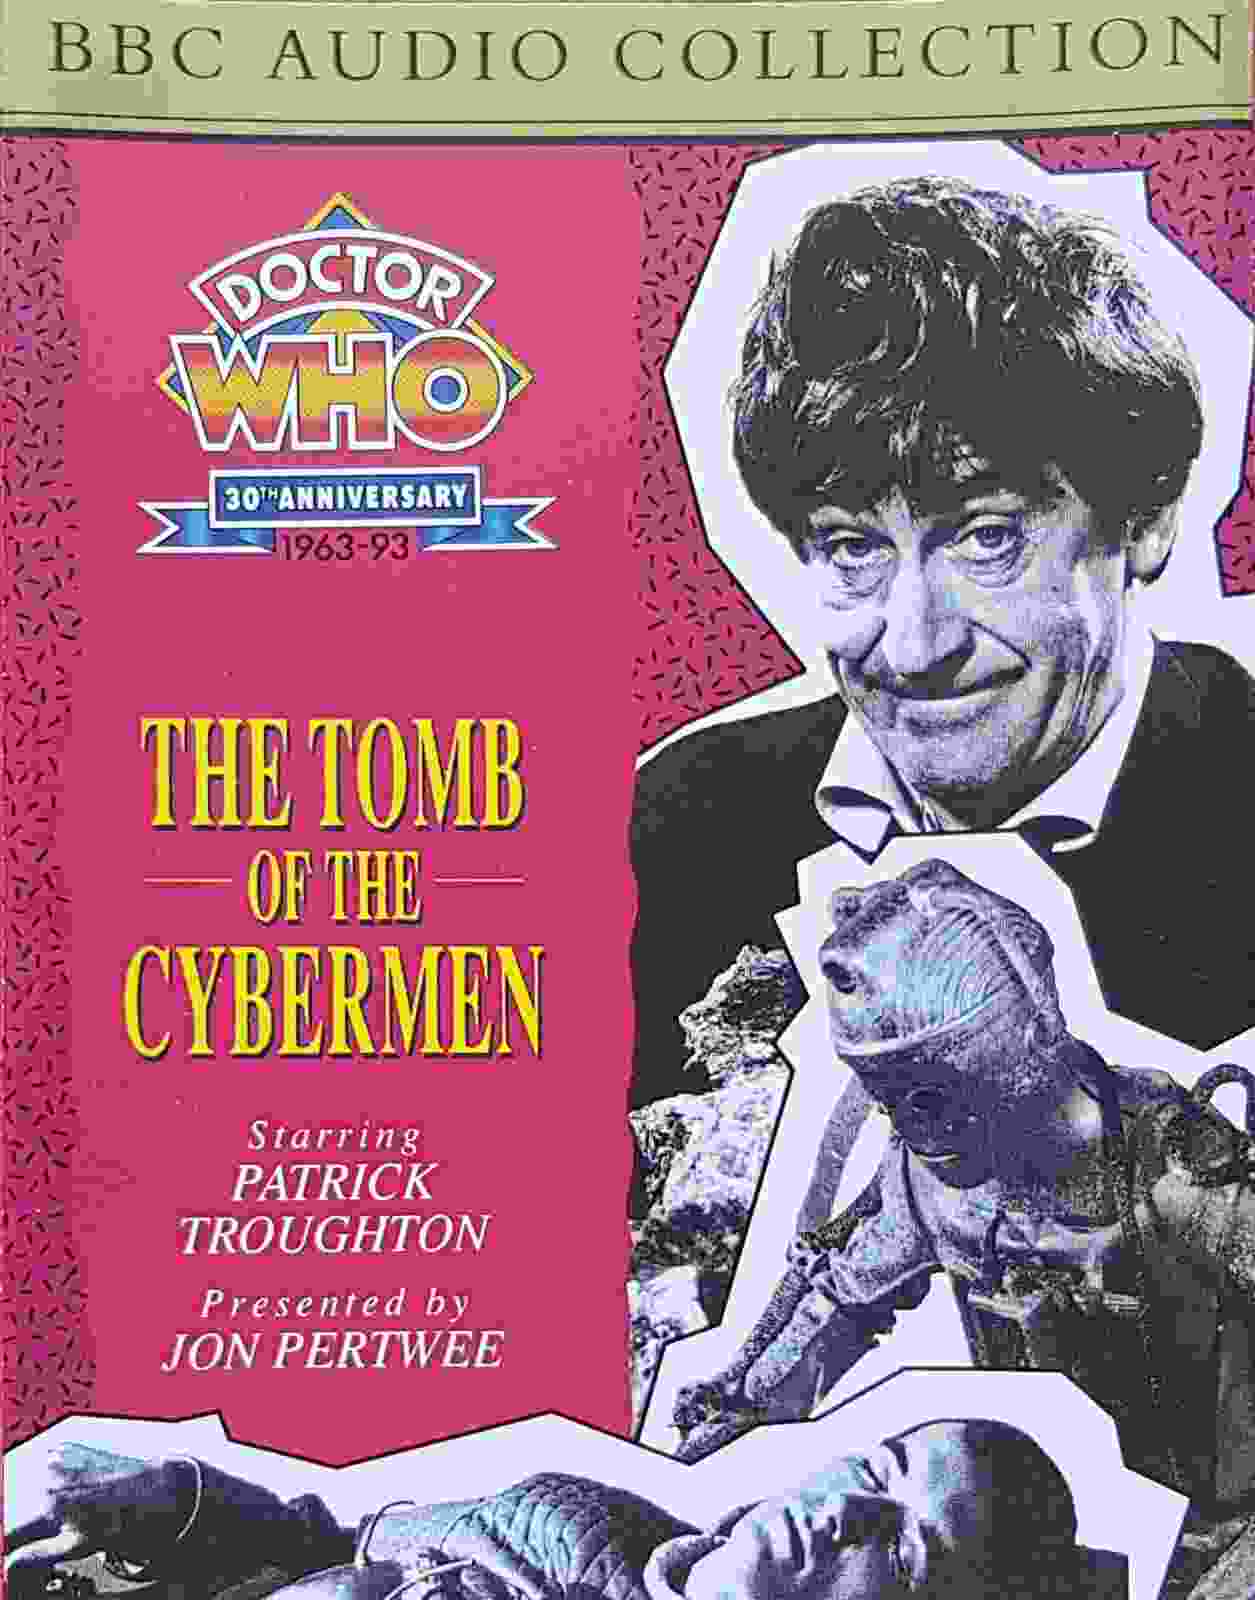 Picture of Doctor Who - The tomb of the Cybermen by artist Kit Peddler / Gerry Davis from the BBC cassettes - Records and Tapes library